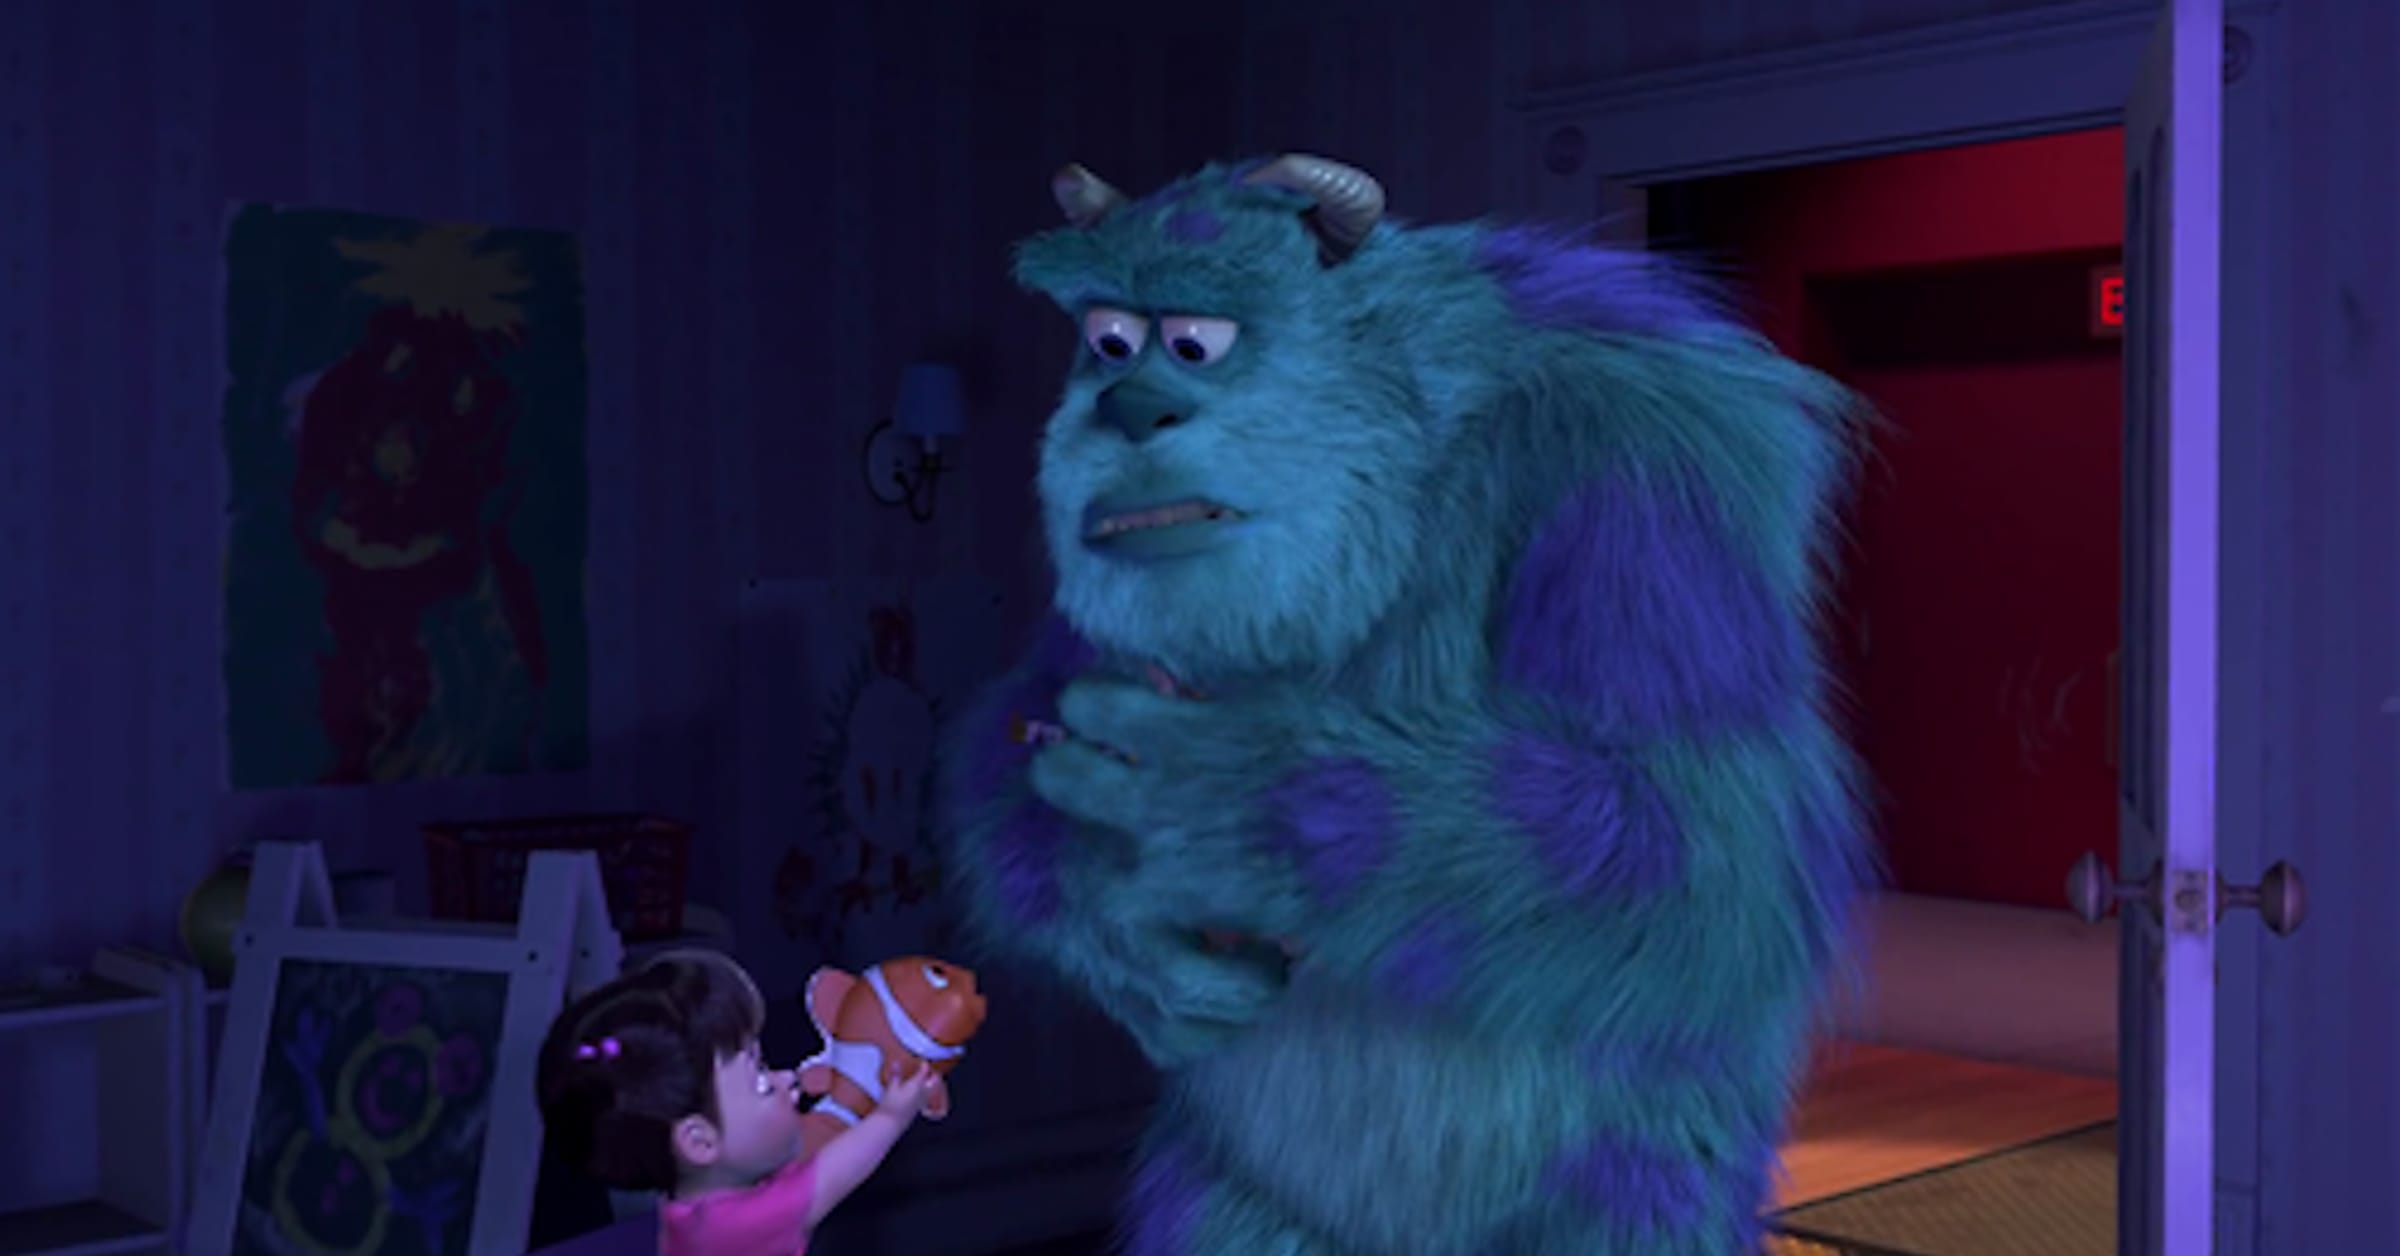 Boo! Which Monsters, Inc. character is most like you? #MonstersInc20th